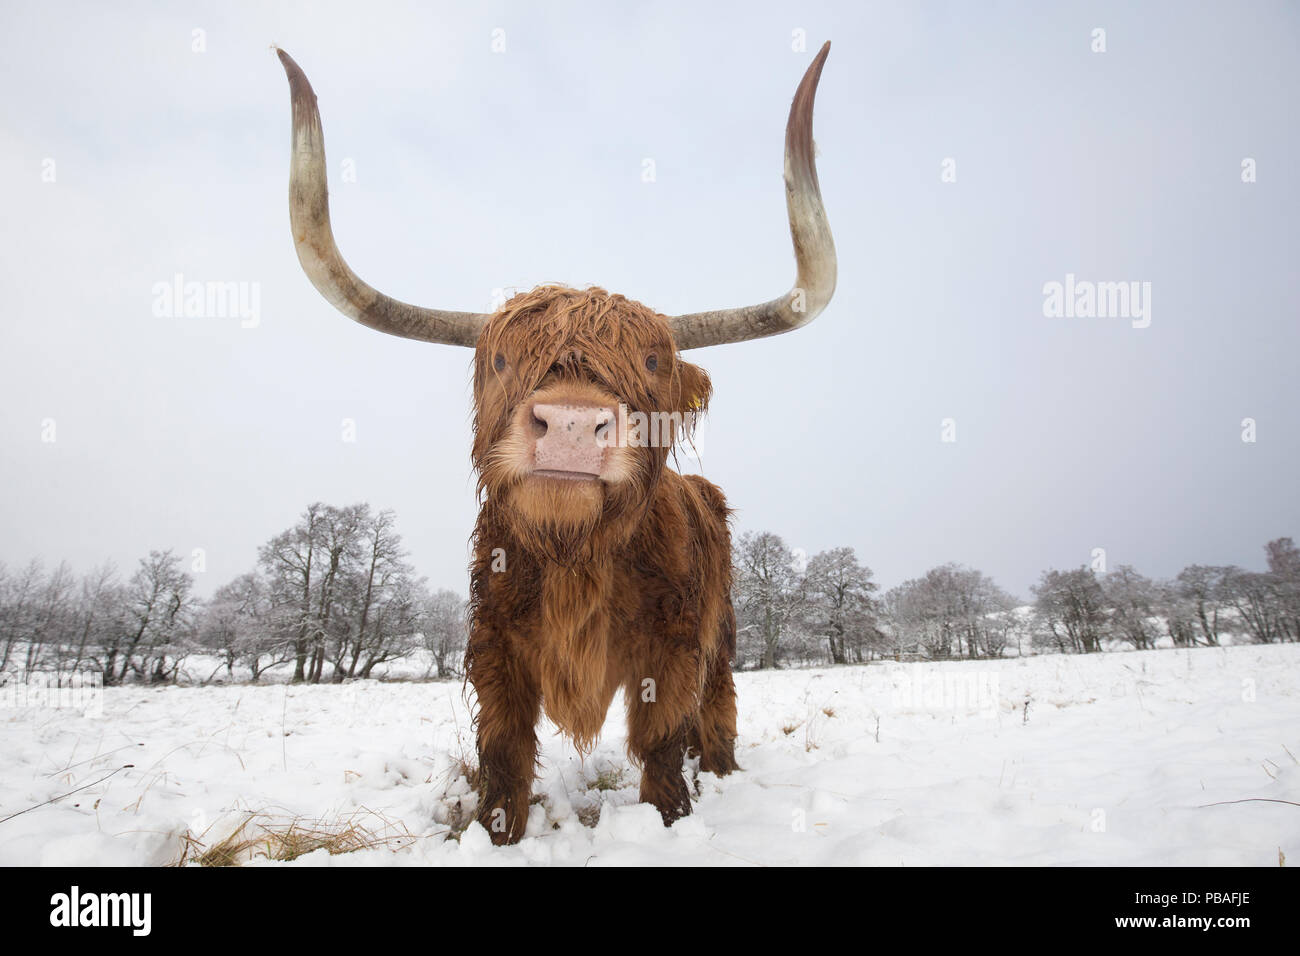 Highland cow in snow, Glenfeshie, Cairngorms National Park, Scotland, UK, February. Stock Photo